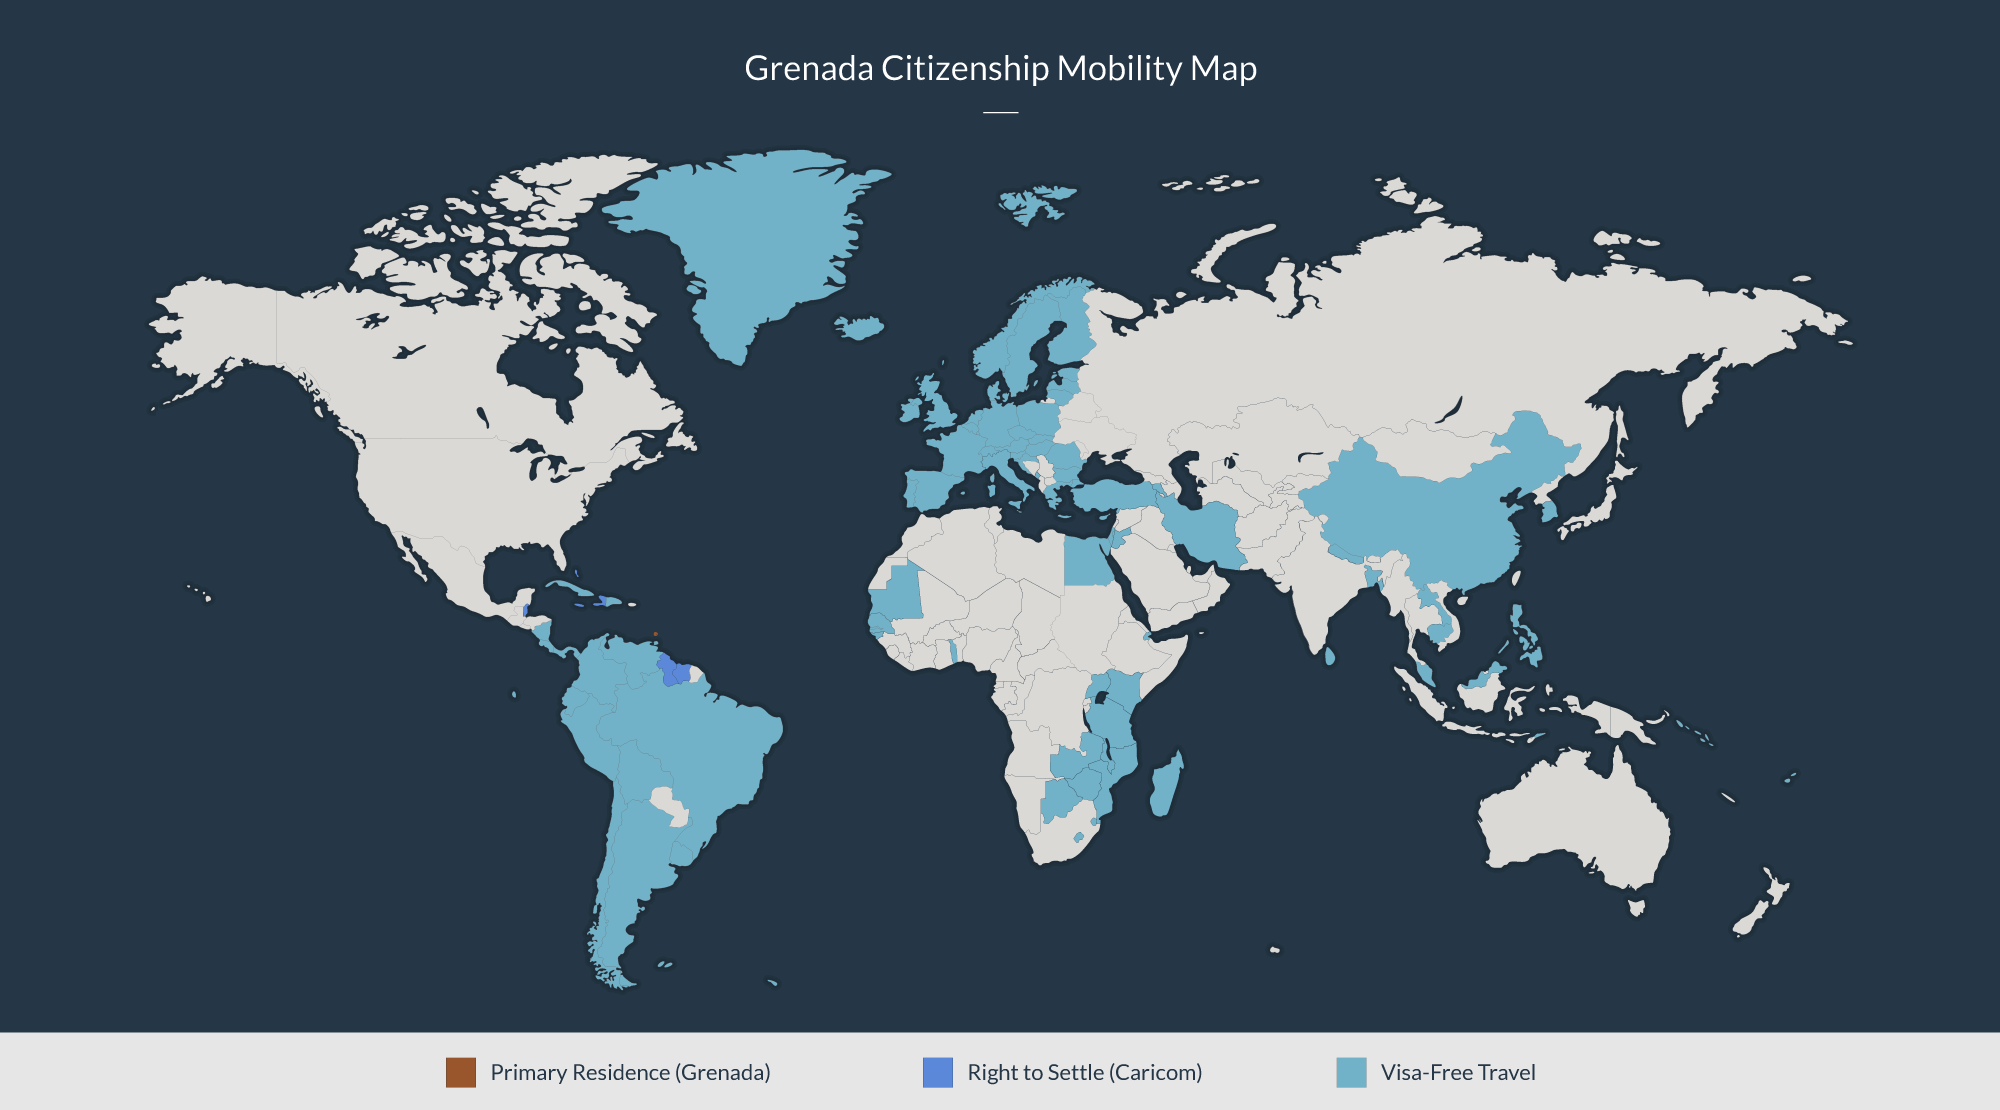 Grenada citizenship mobility map: Primary residence in Grenada, Right to settle in the Caricom, and Visa-free travel to many other countries.